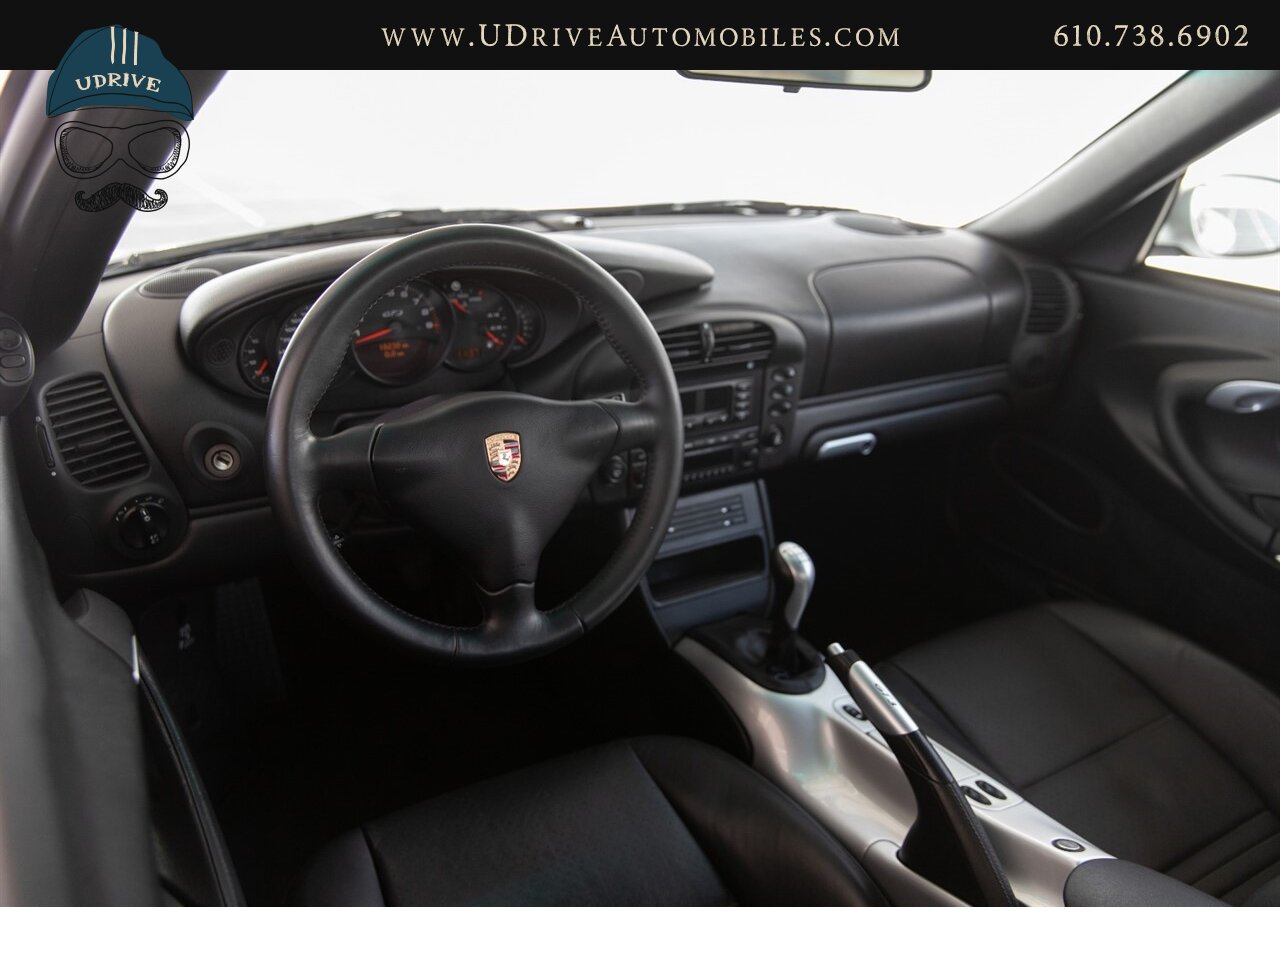 2004 Porsche 911 GT3 18k Miles Sport Seats Painted Hardback Seats  Thicker Steering Wheel Xenon Headlamps - Photo 33 - West Chester, PA 19382